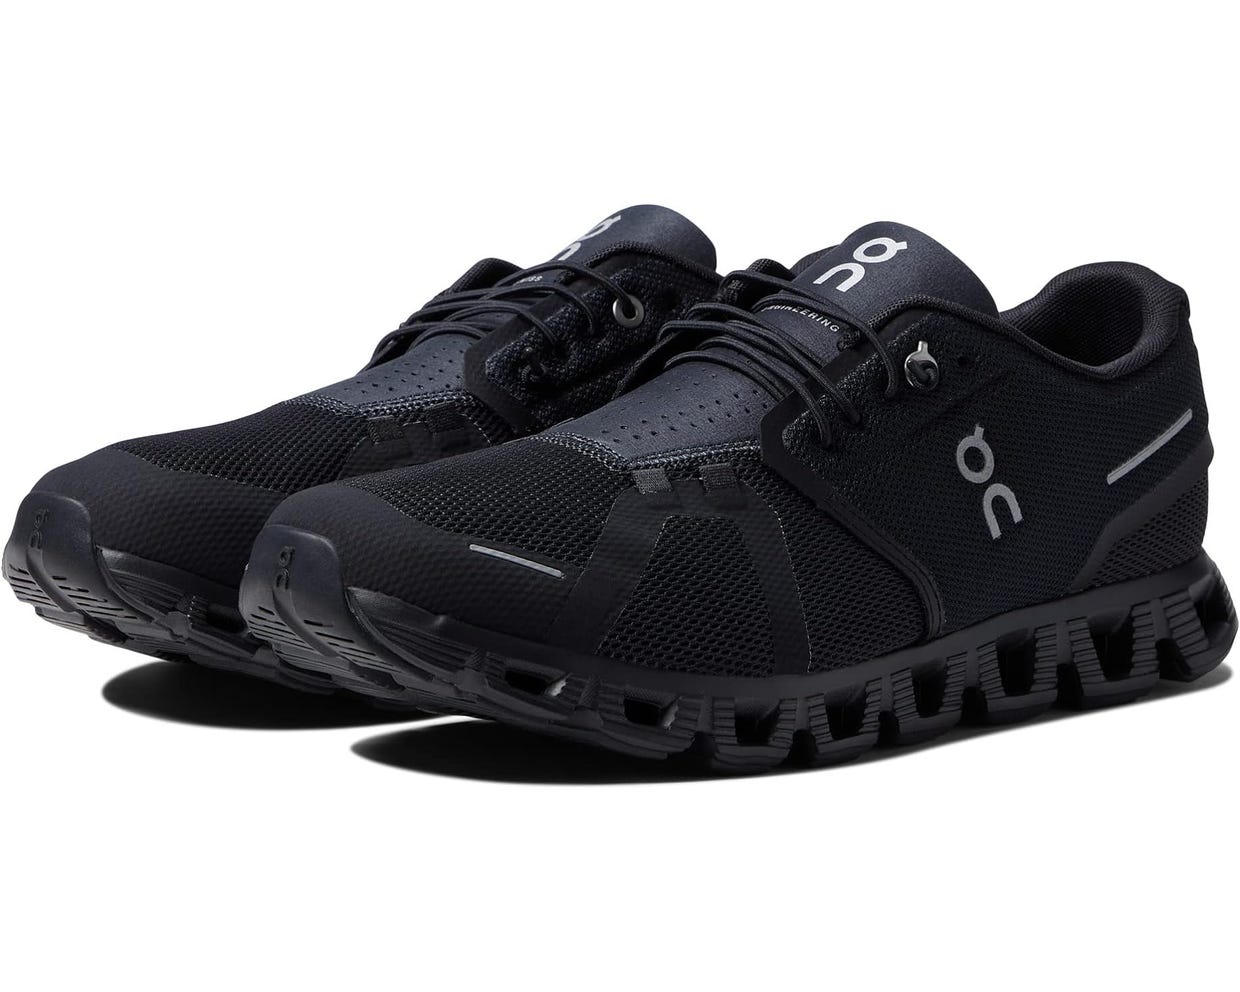 A pair of black running shoes with a distinctive sole design and white branding on the sides.